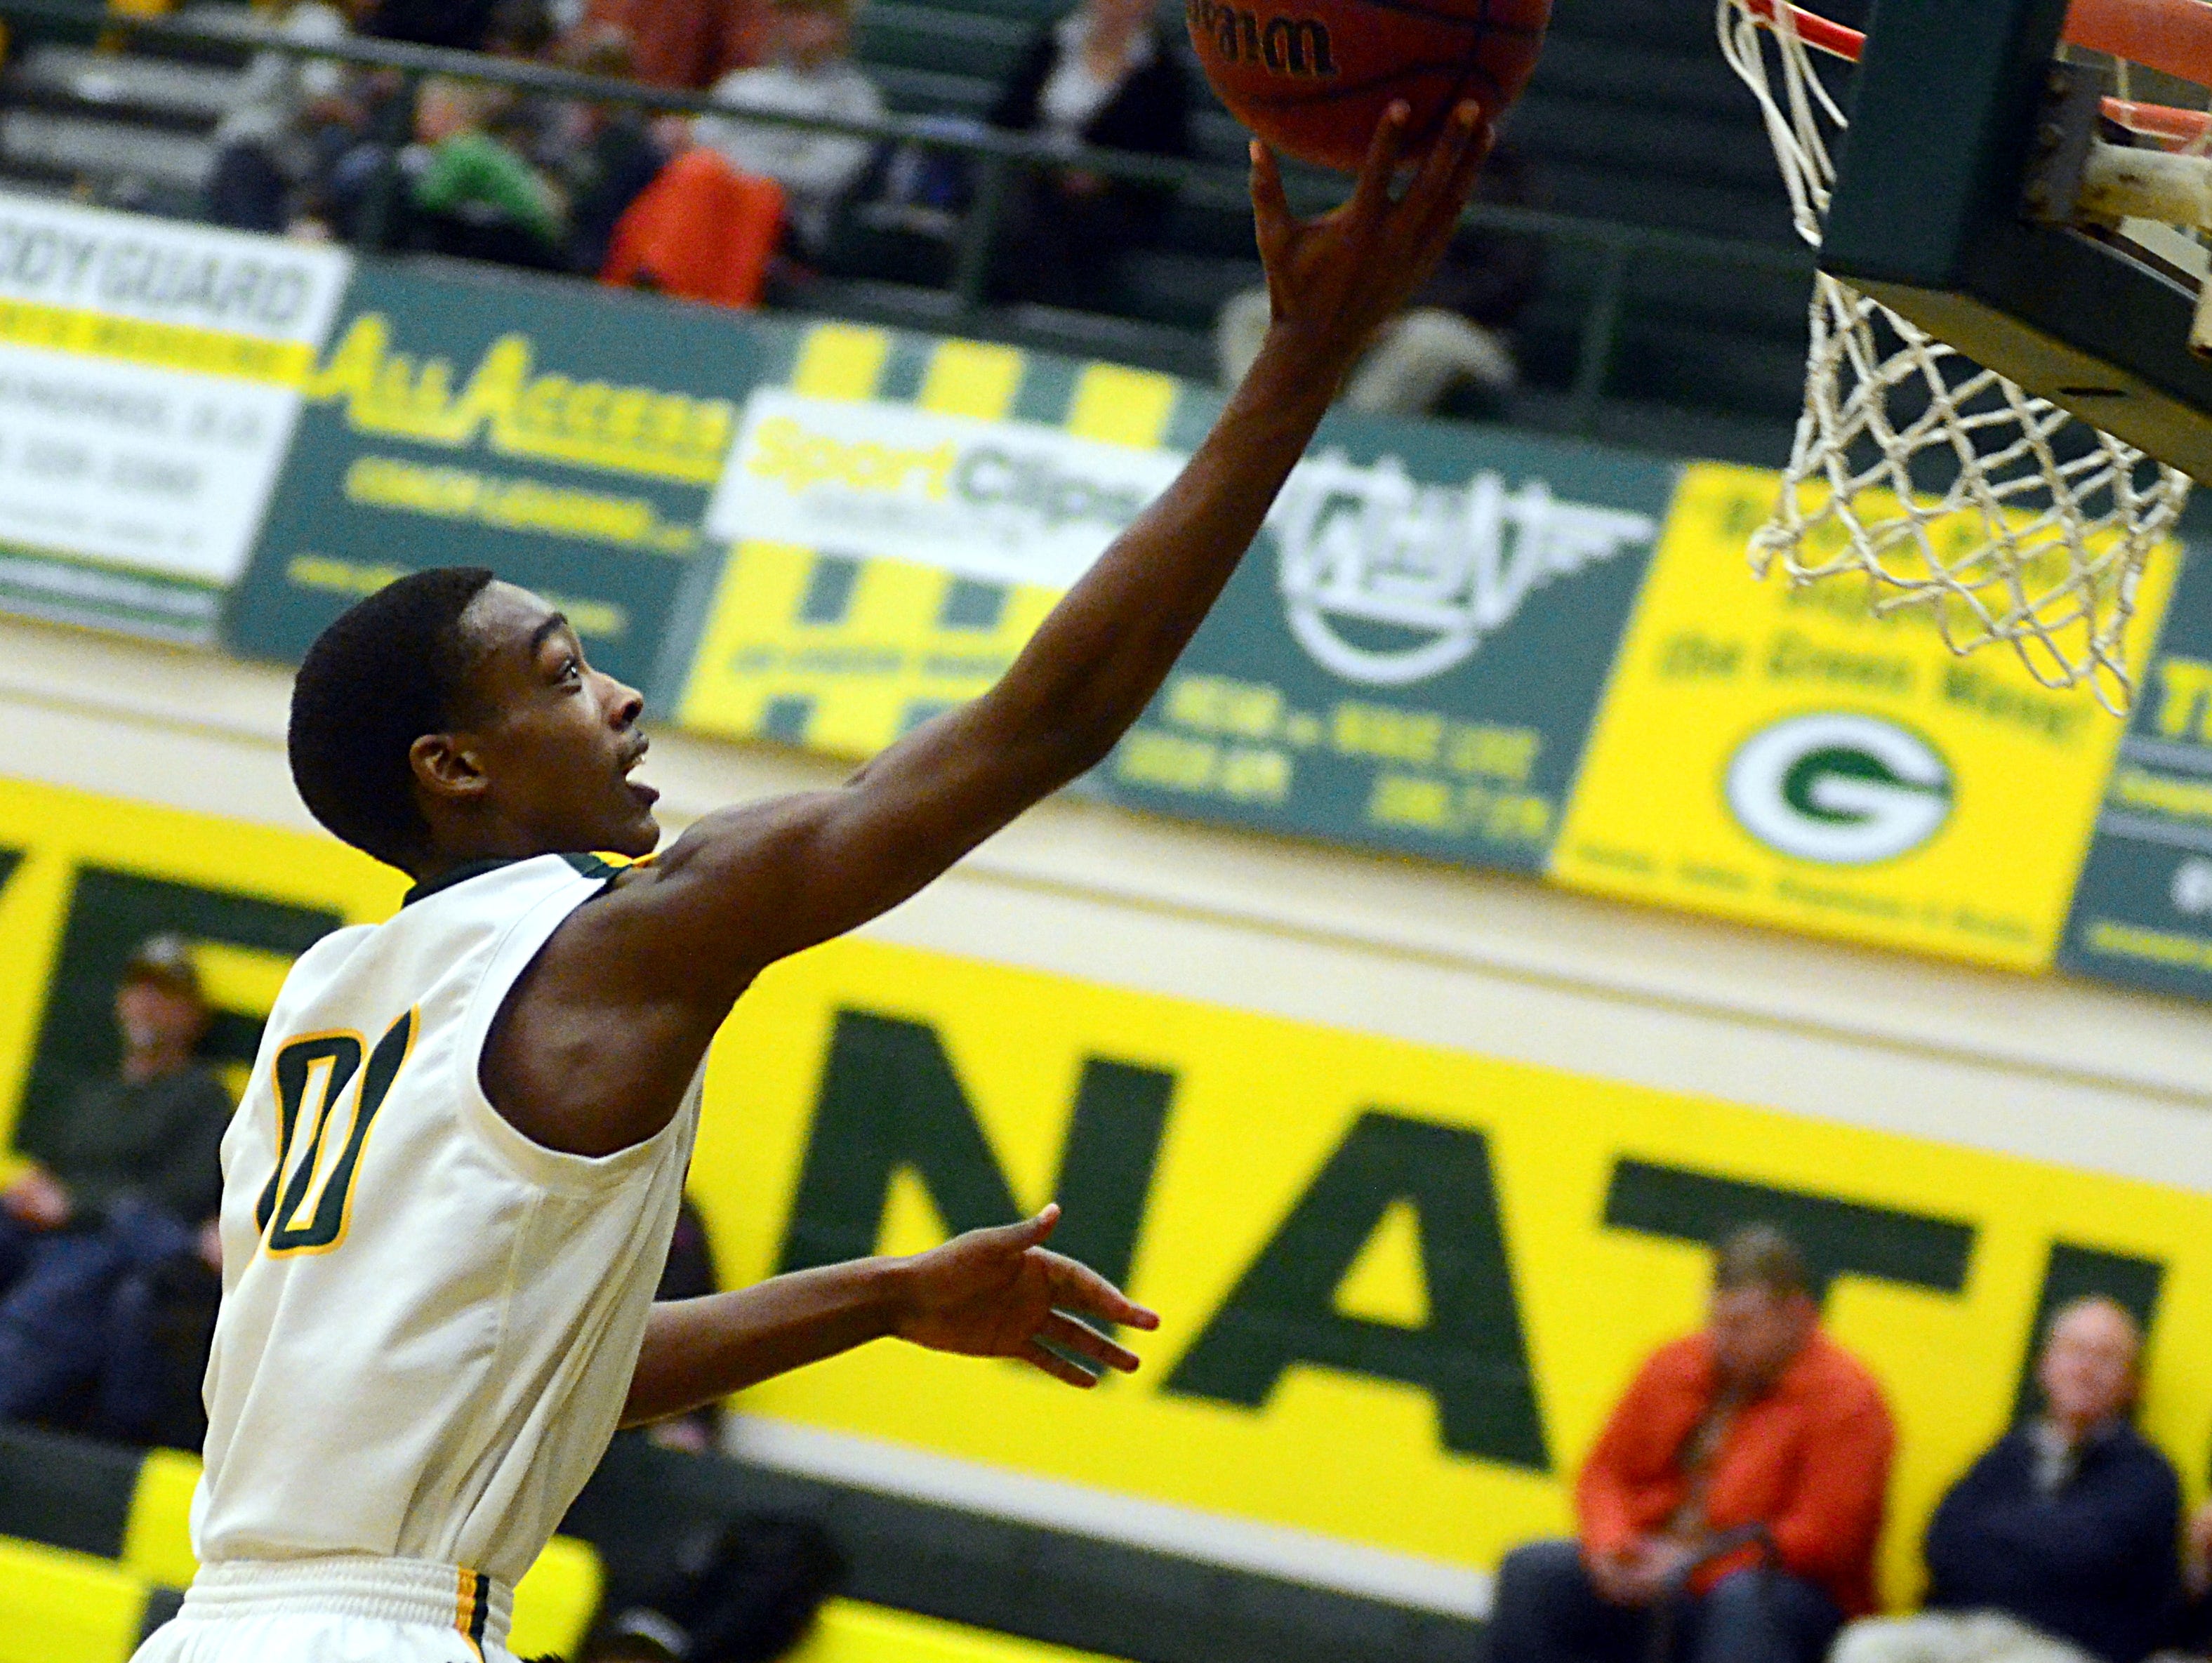 Gallatin High junior Marlon Mitchell elevates for a layin during second-quarter action. Mitchell scored eight points.